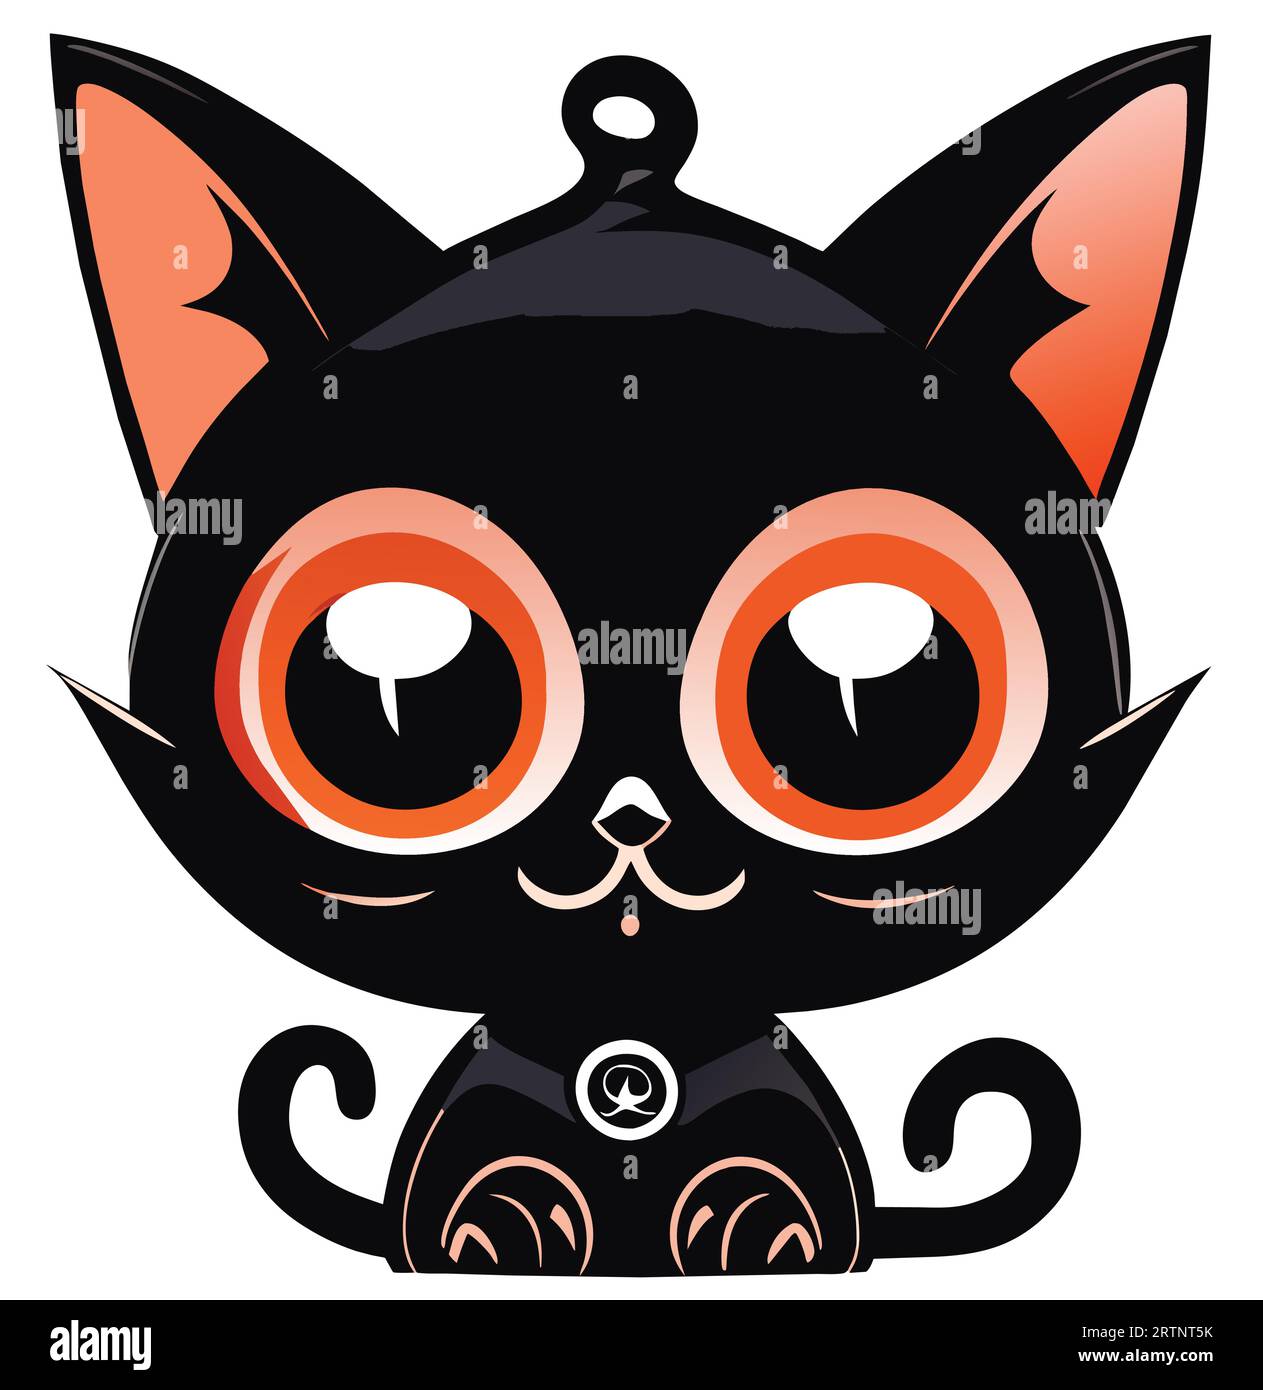 Get chills with this spooky black cat vector. Perfect for Halloween designs. High-quality and editable.Creepy black cat vector illustration Stock Vector